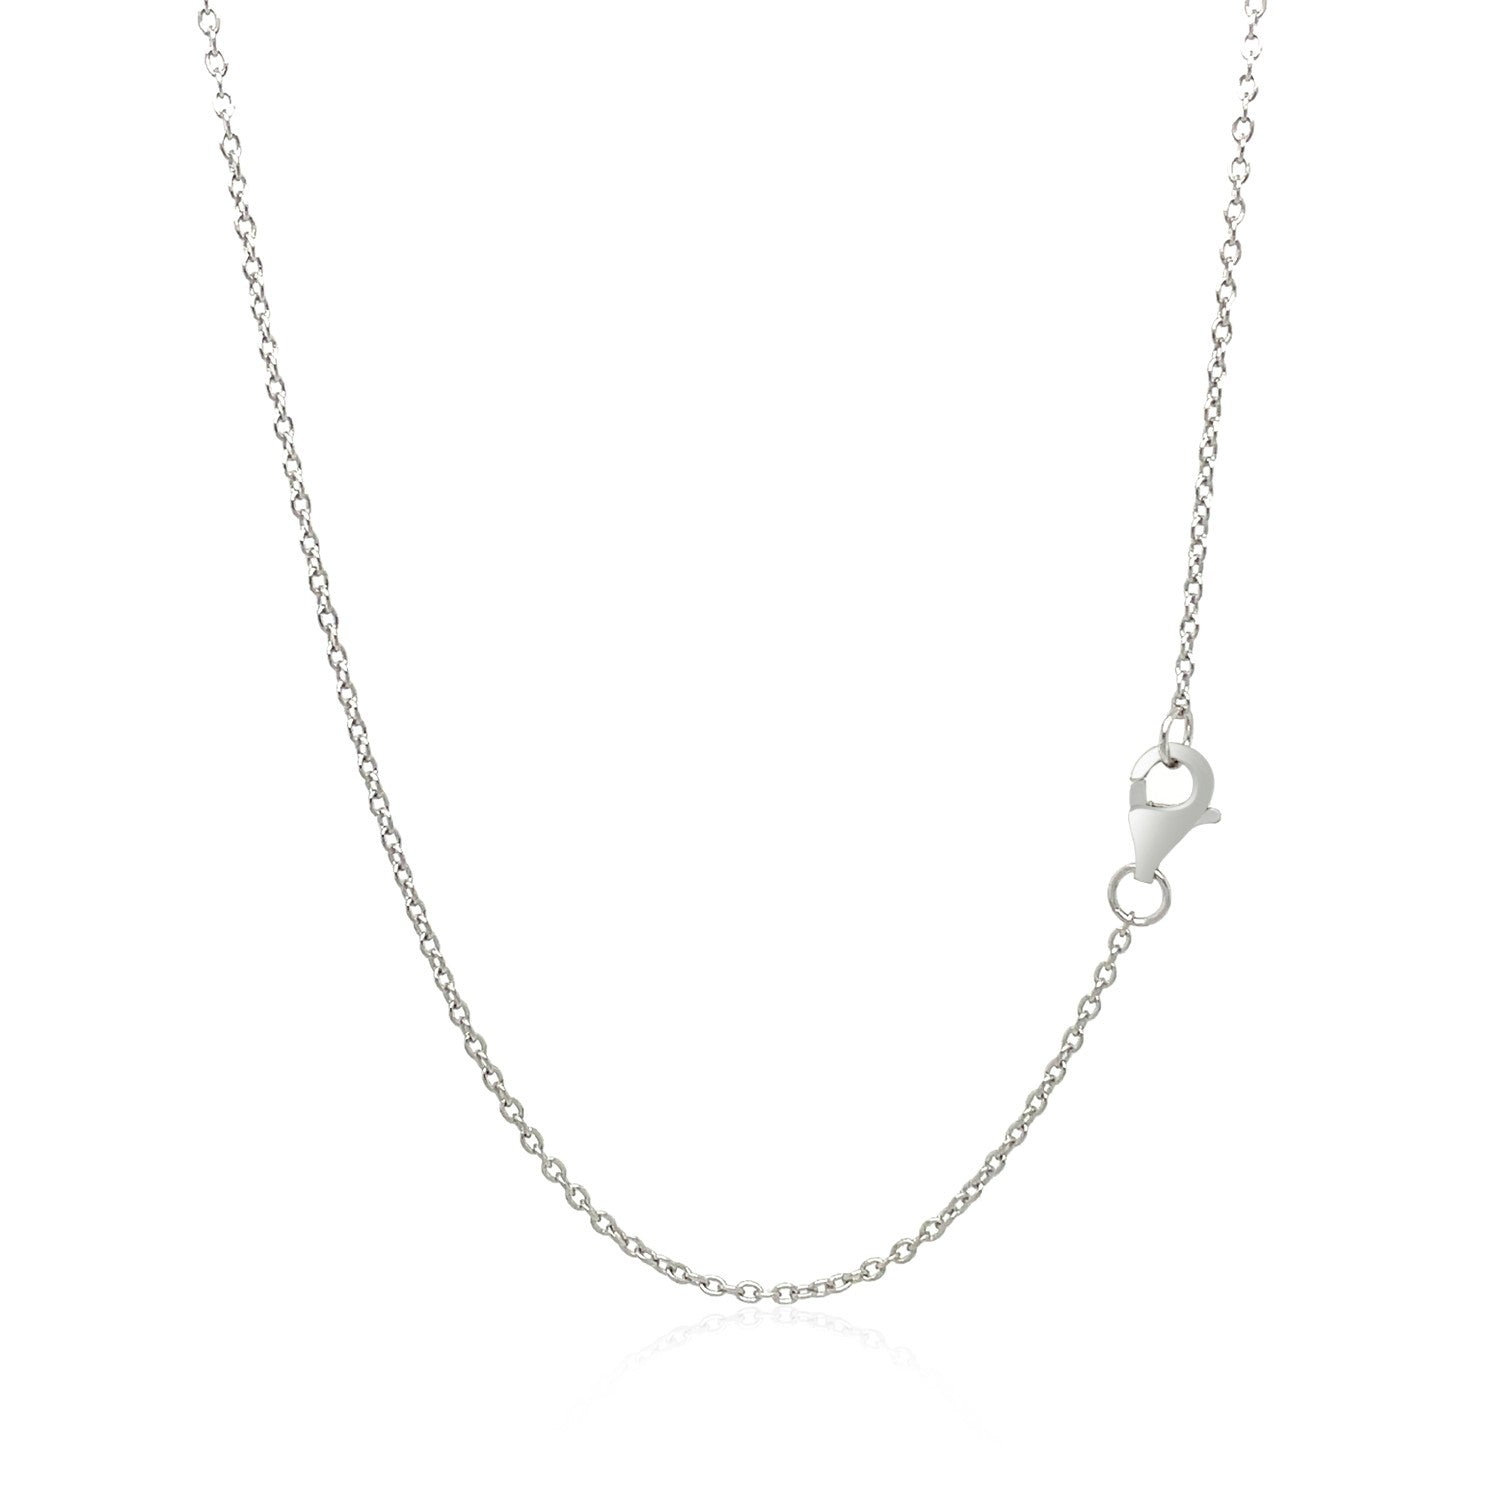 Double Heart Infinity Necklace with Cubic Zirconia in Sterling Silver